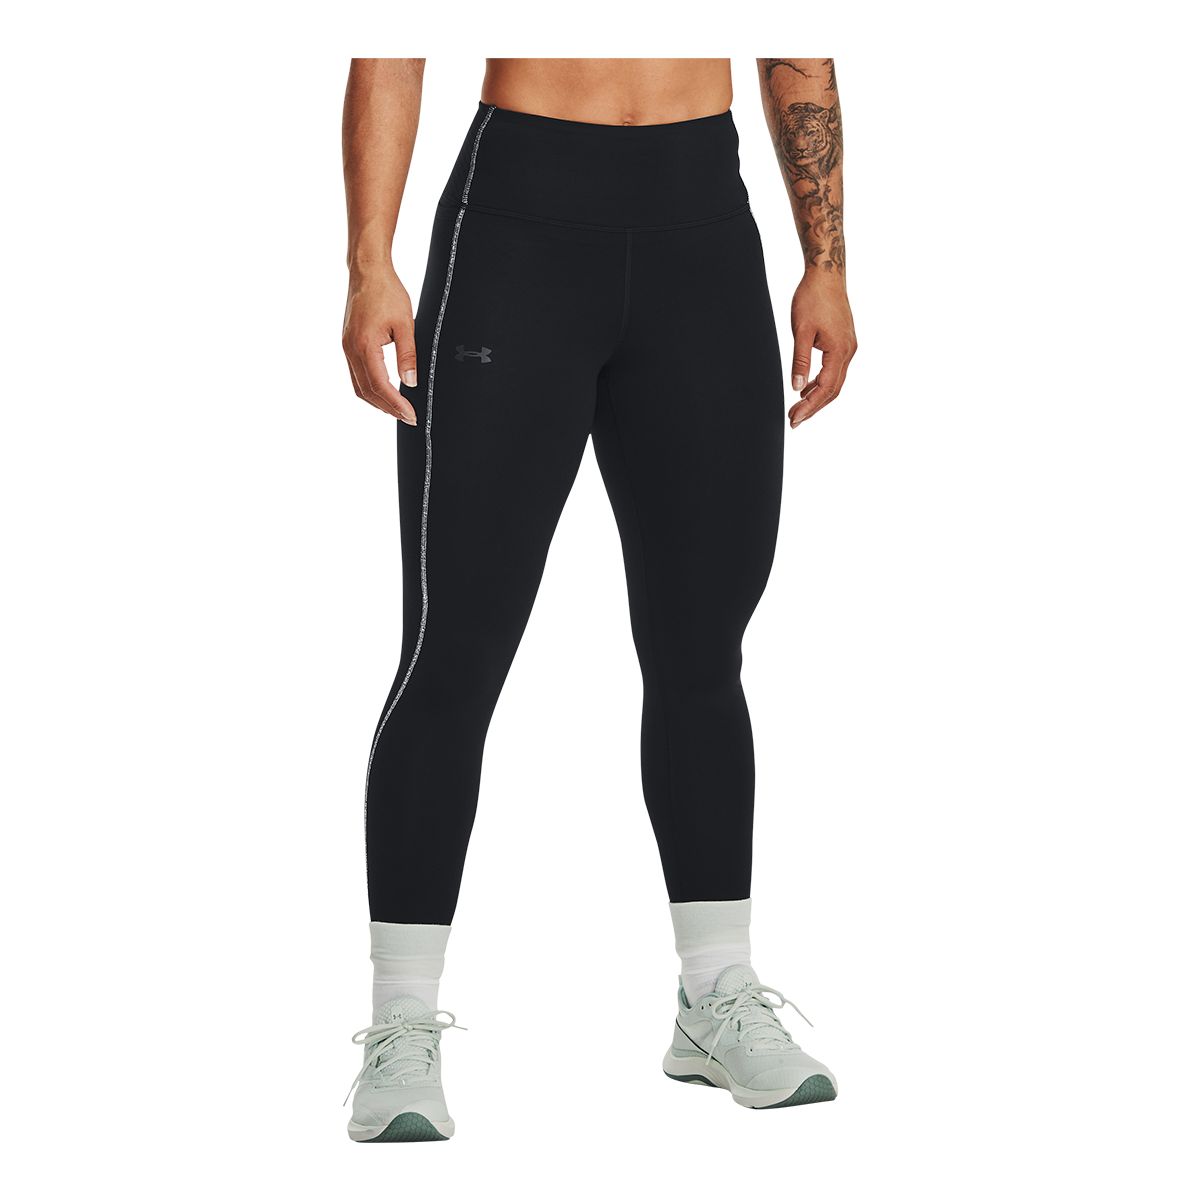 Under Armour Women's Armour Cold Tights